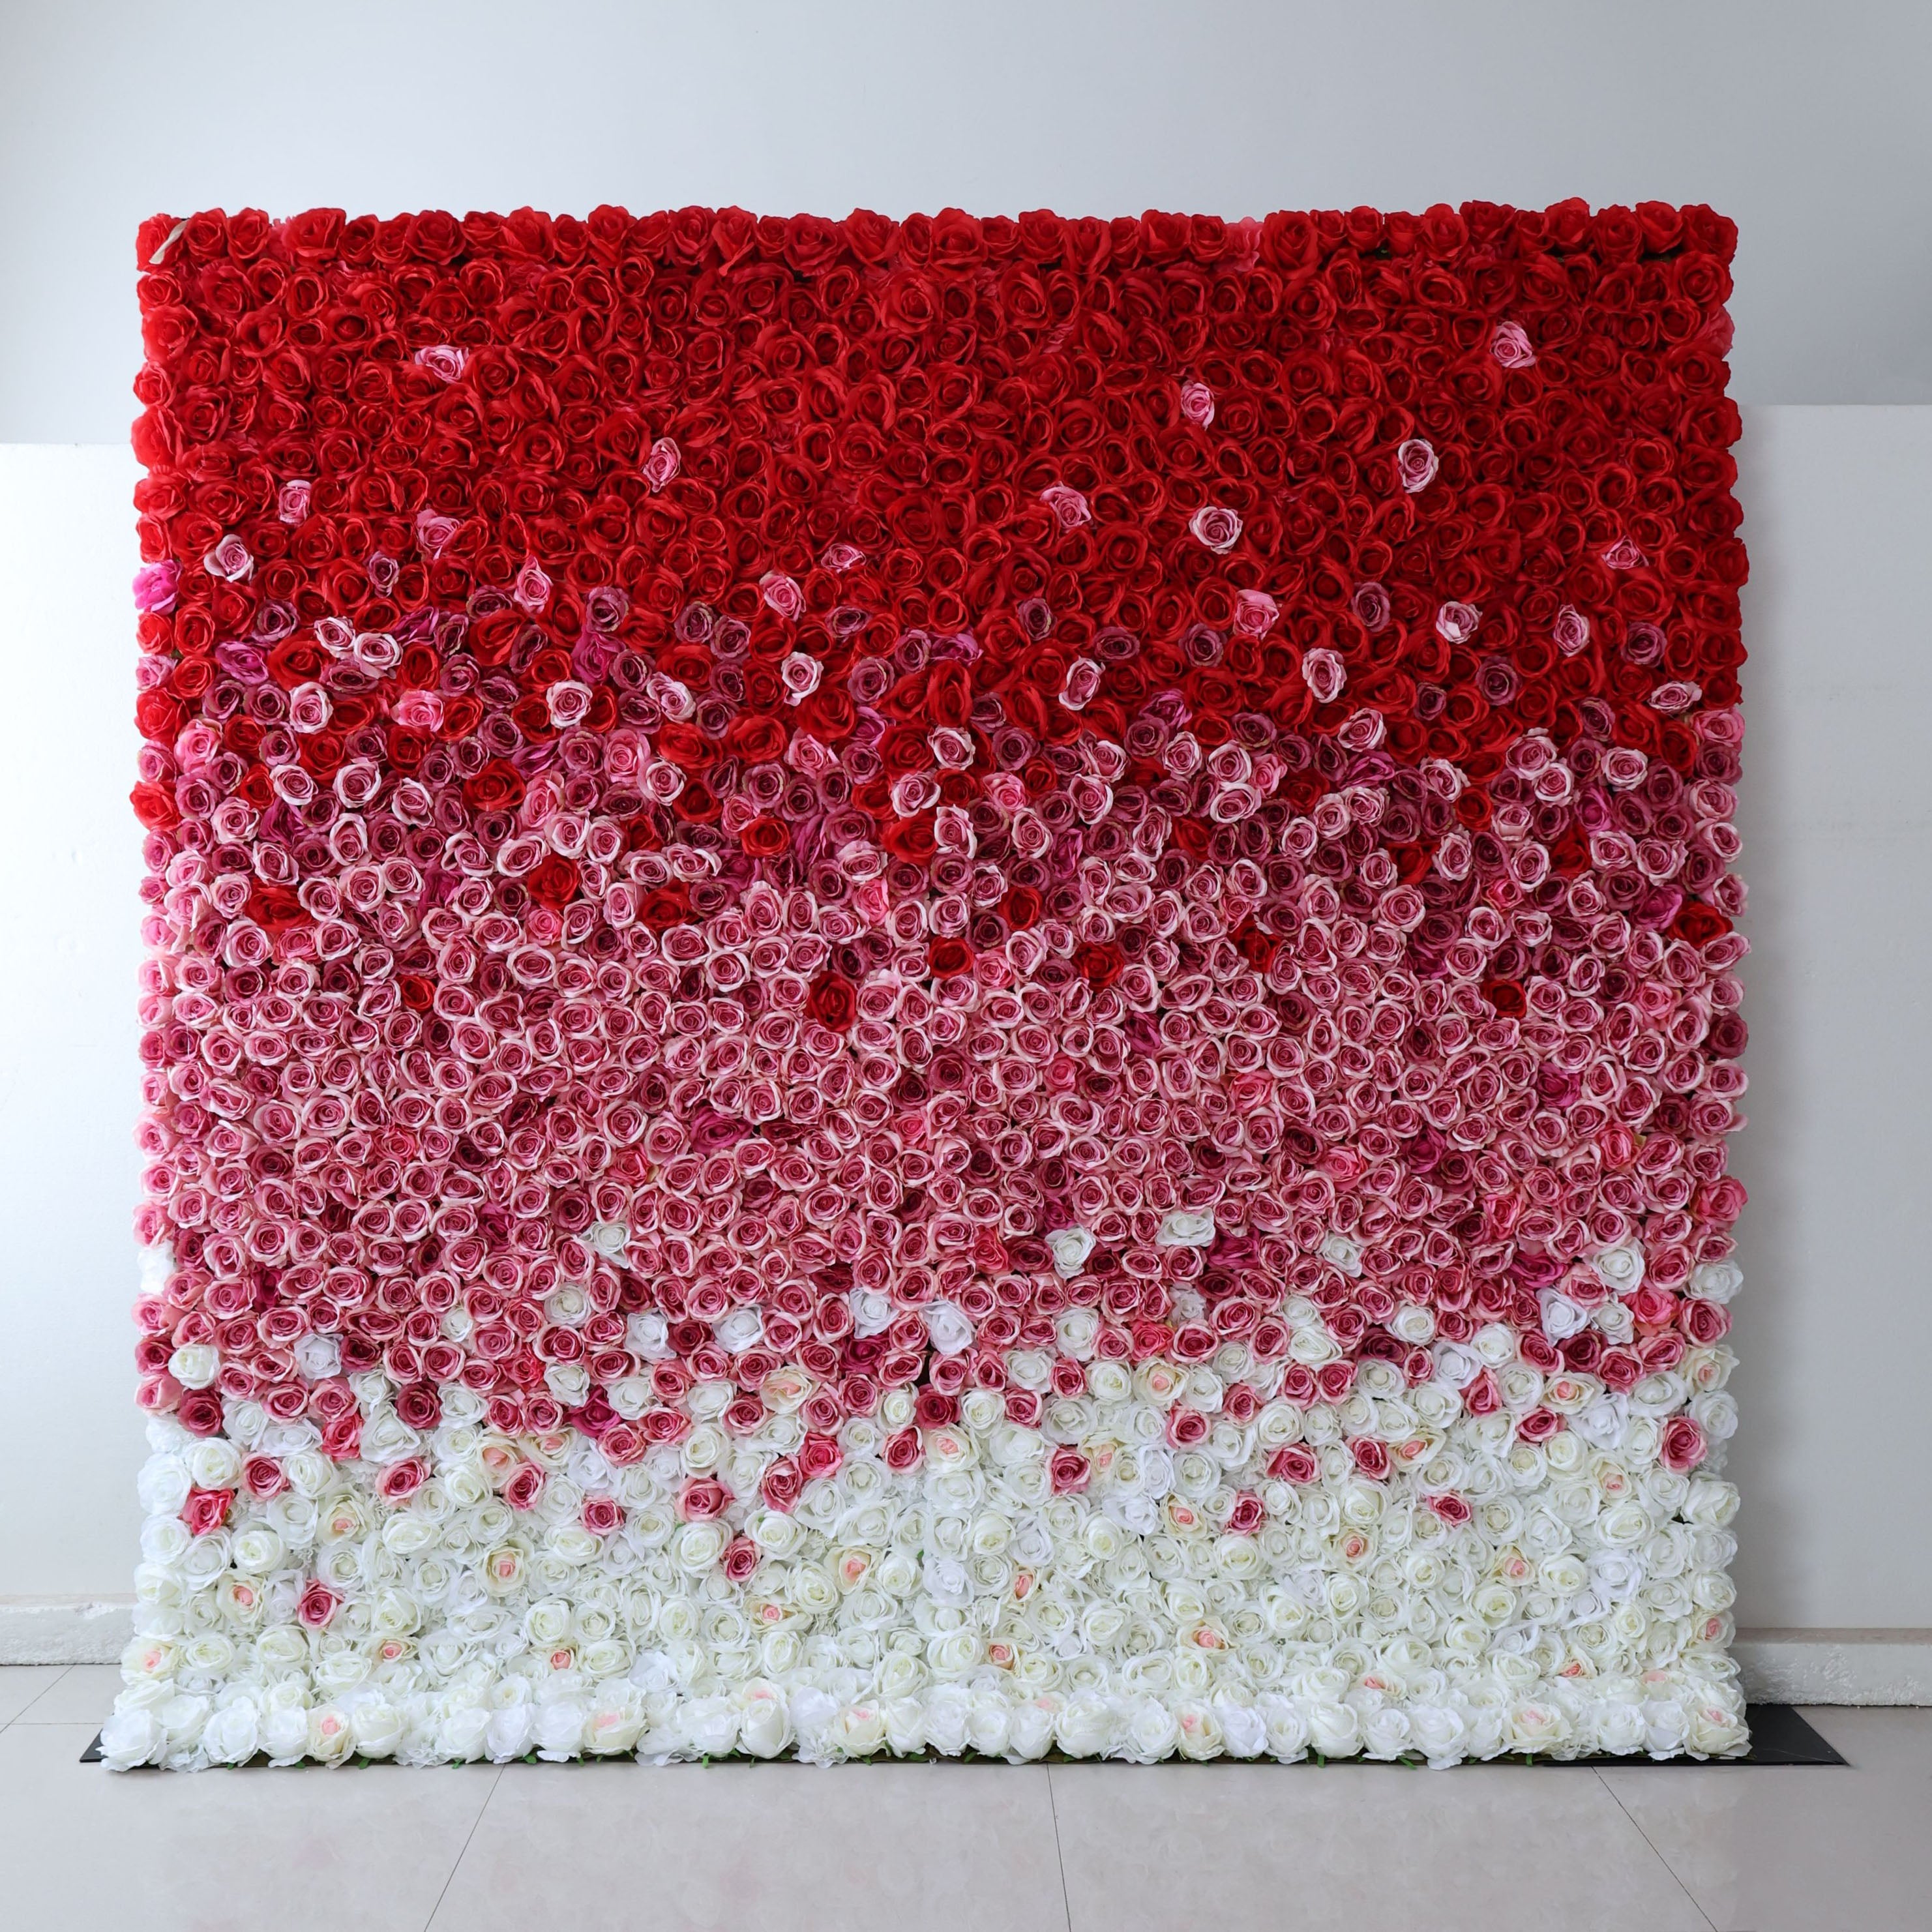 Valar Flowers Roll Up Fabric Artificial Red to White Gradient Flower Wall Wedding Backdrop, Floral Party Decor, Event Photography-VF-338